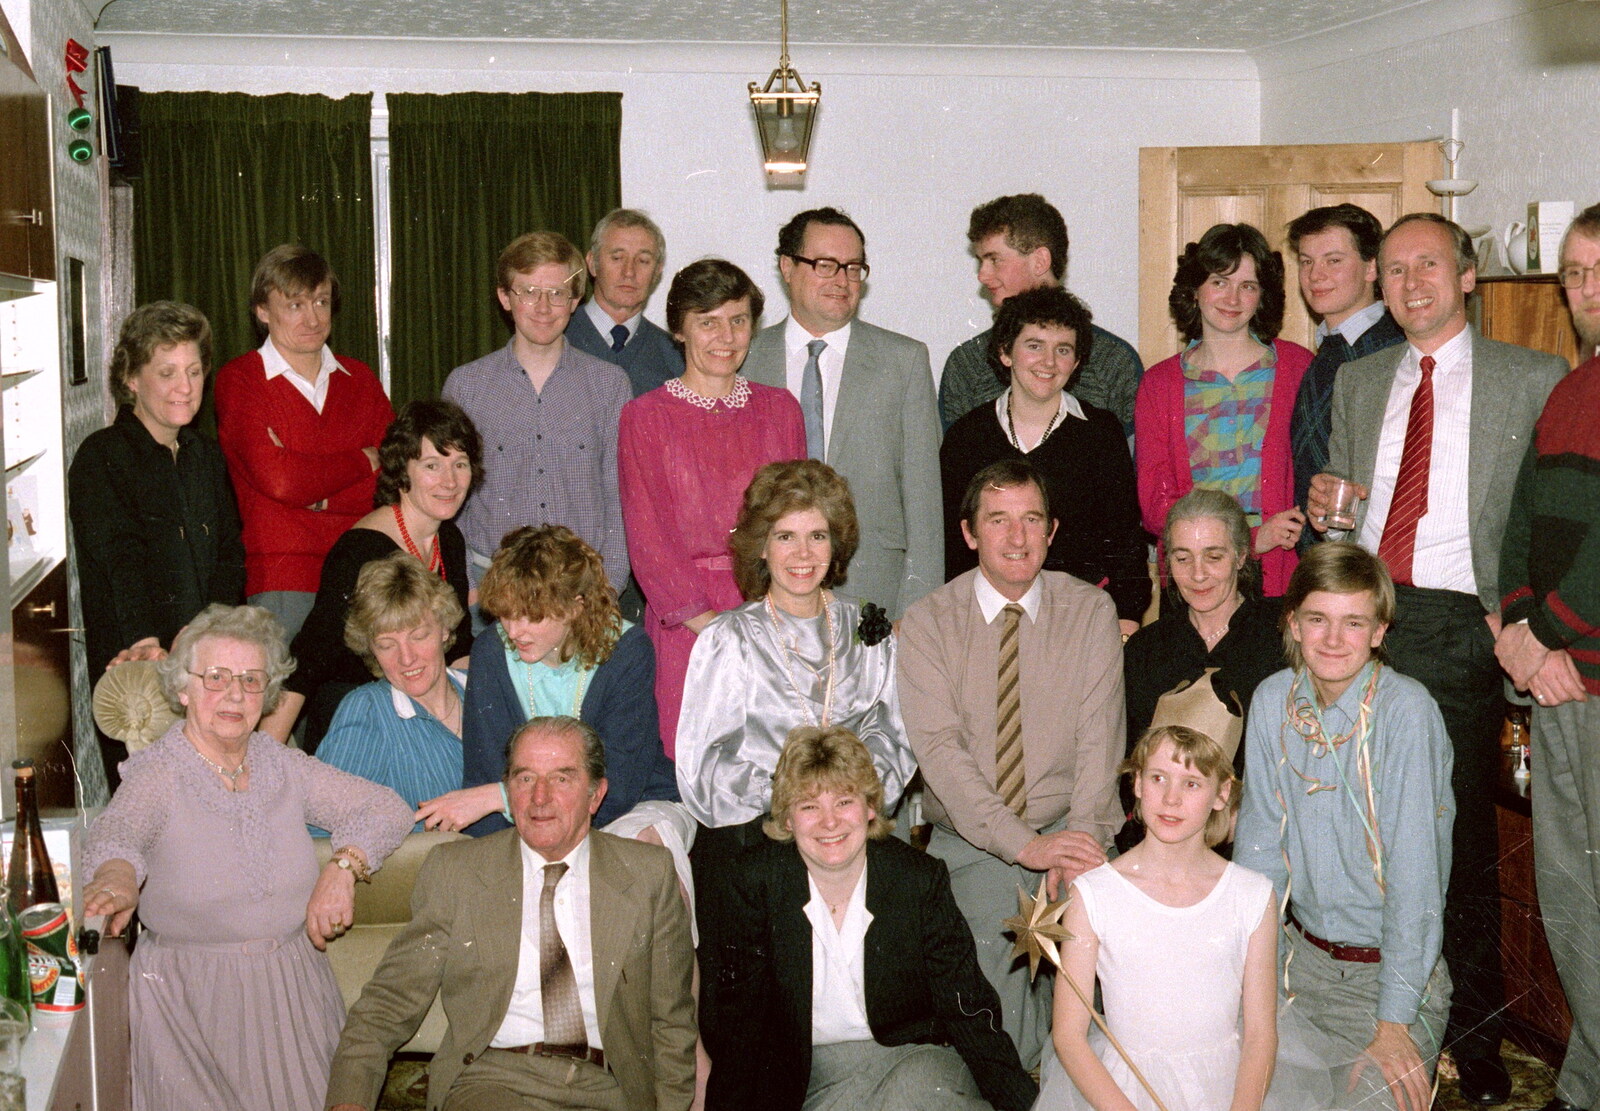 Nosher gets in on the group photo from New Year's Eve at Anna's, Walkford, Dorset - 31st December 1985